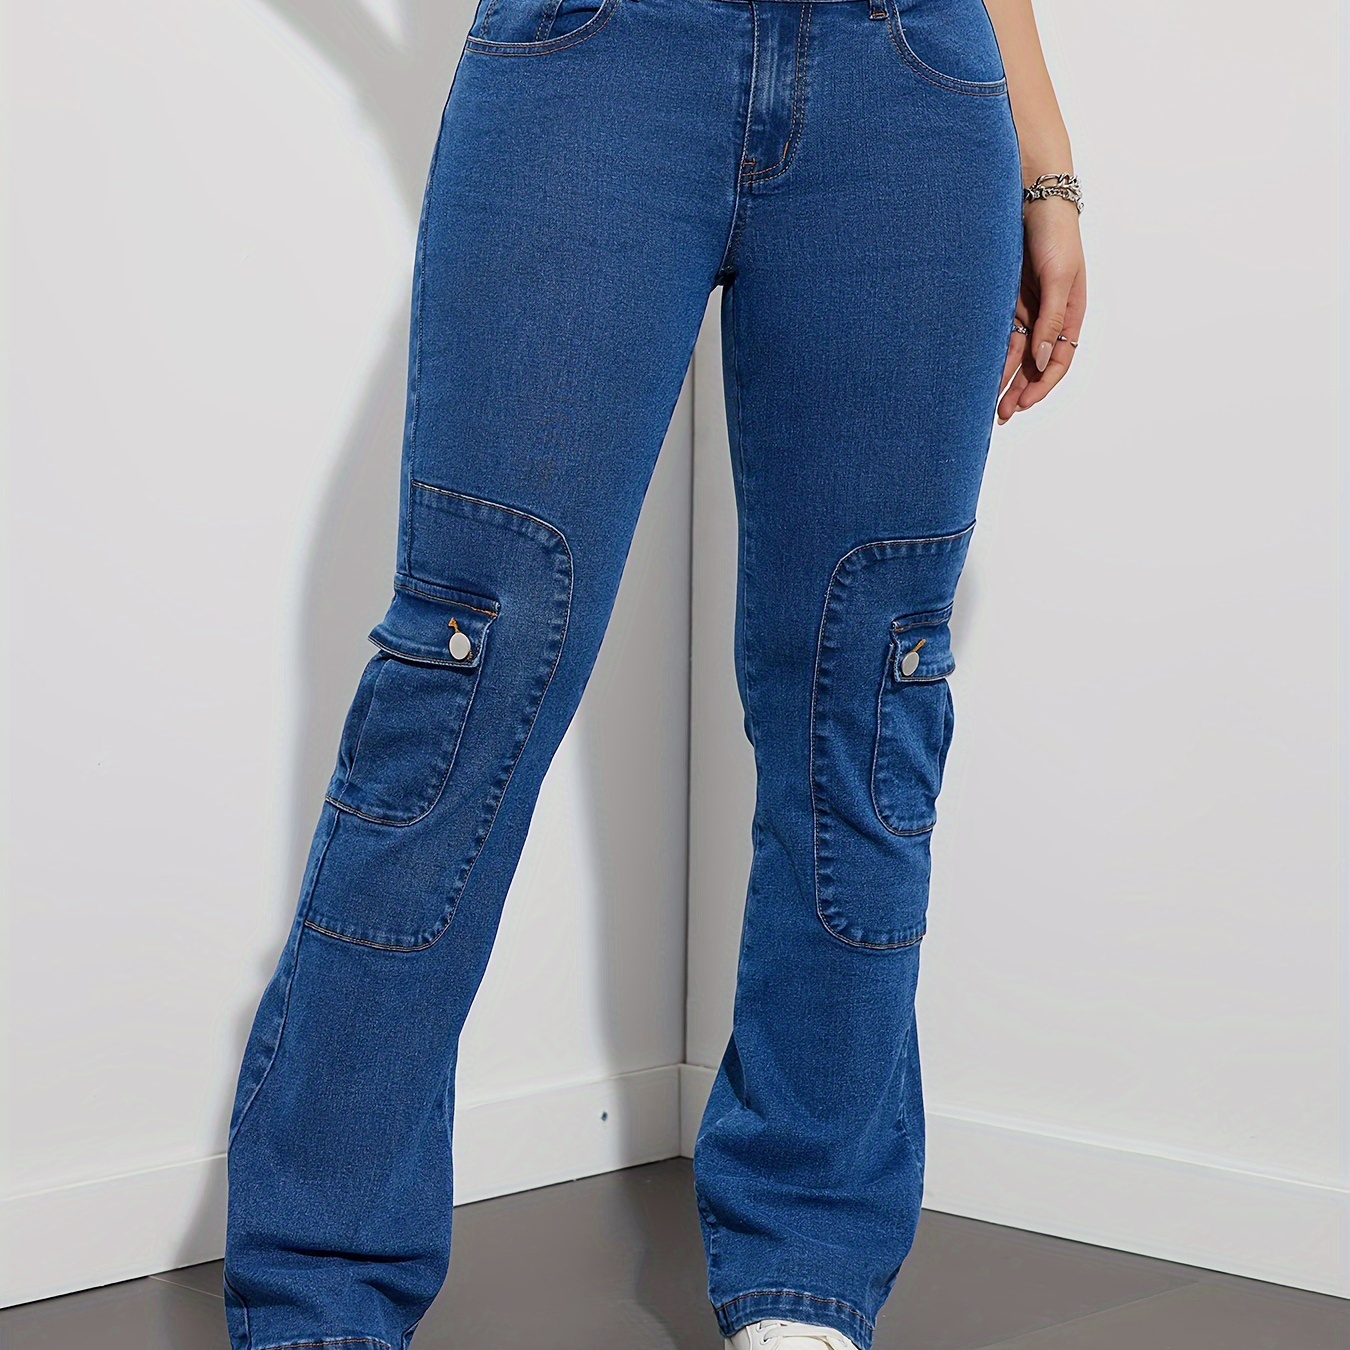 

Women's Mid-waist Stretchy Flared Jeans With Flap Pocket Design, Casual Style Bootcut Denim Pants, Fashionable Trousers For Everyday Wear